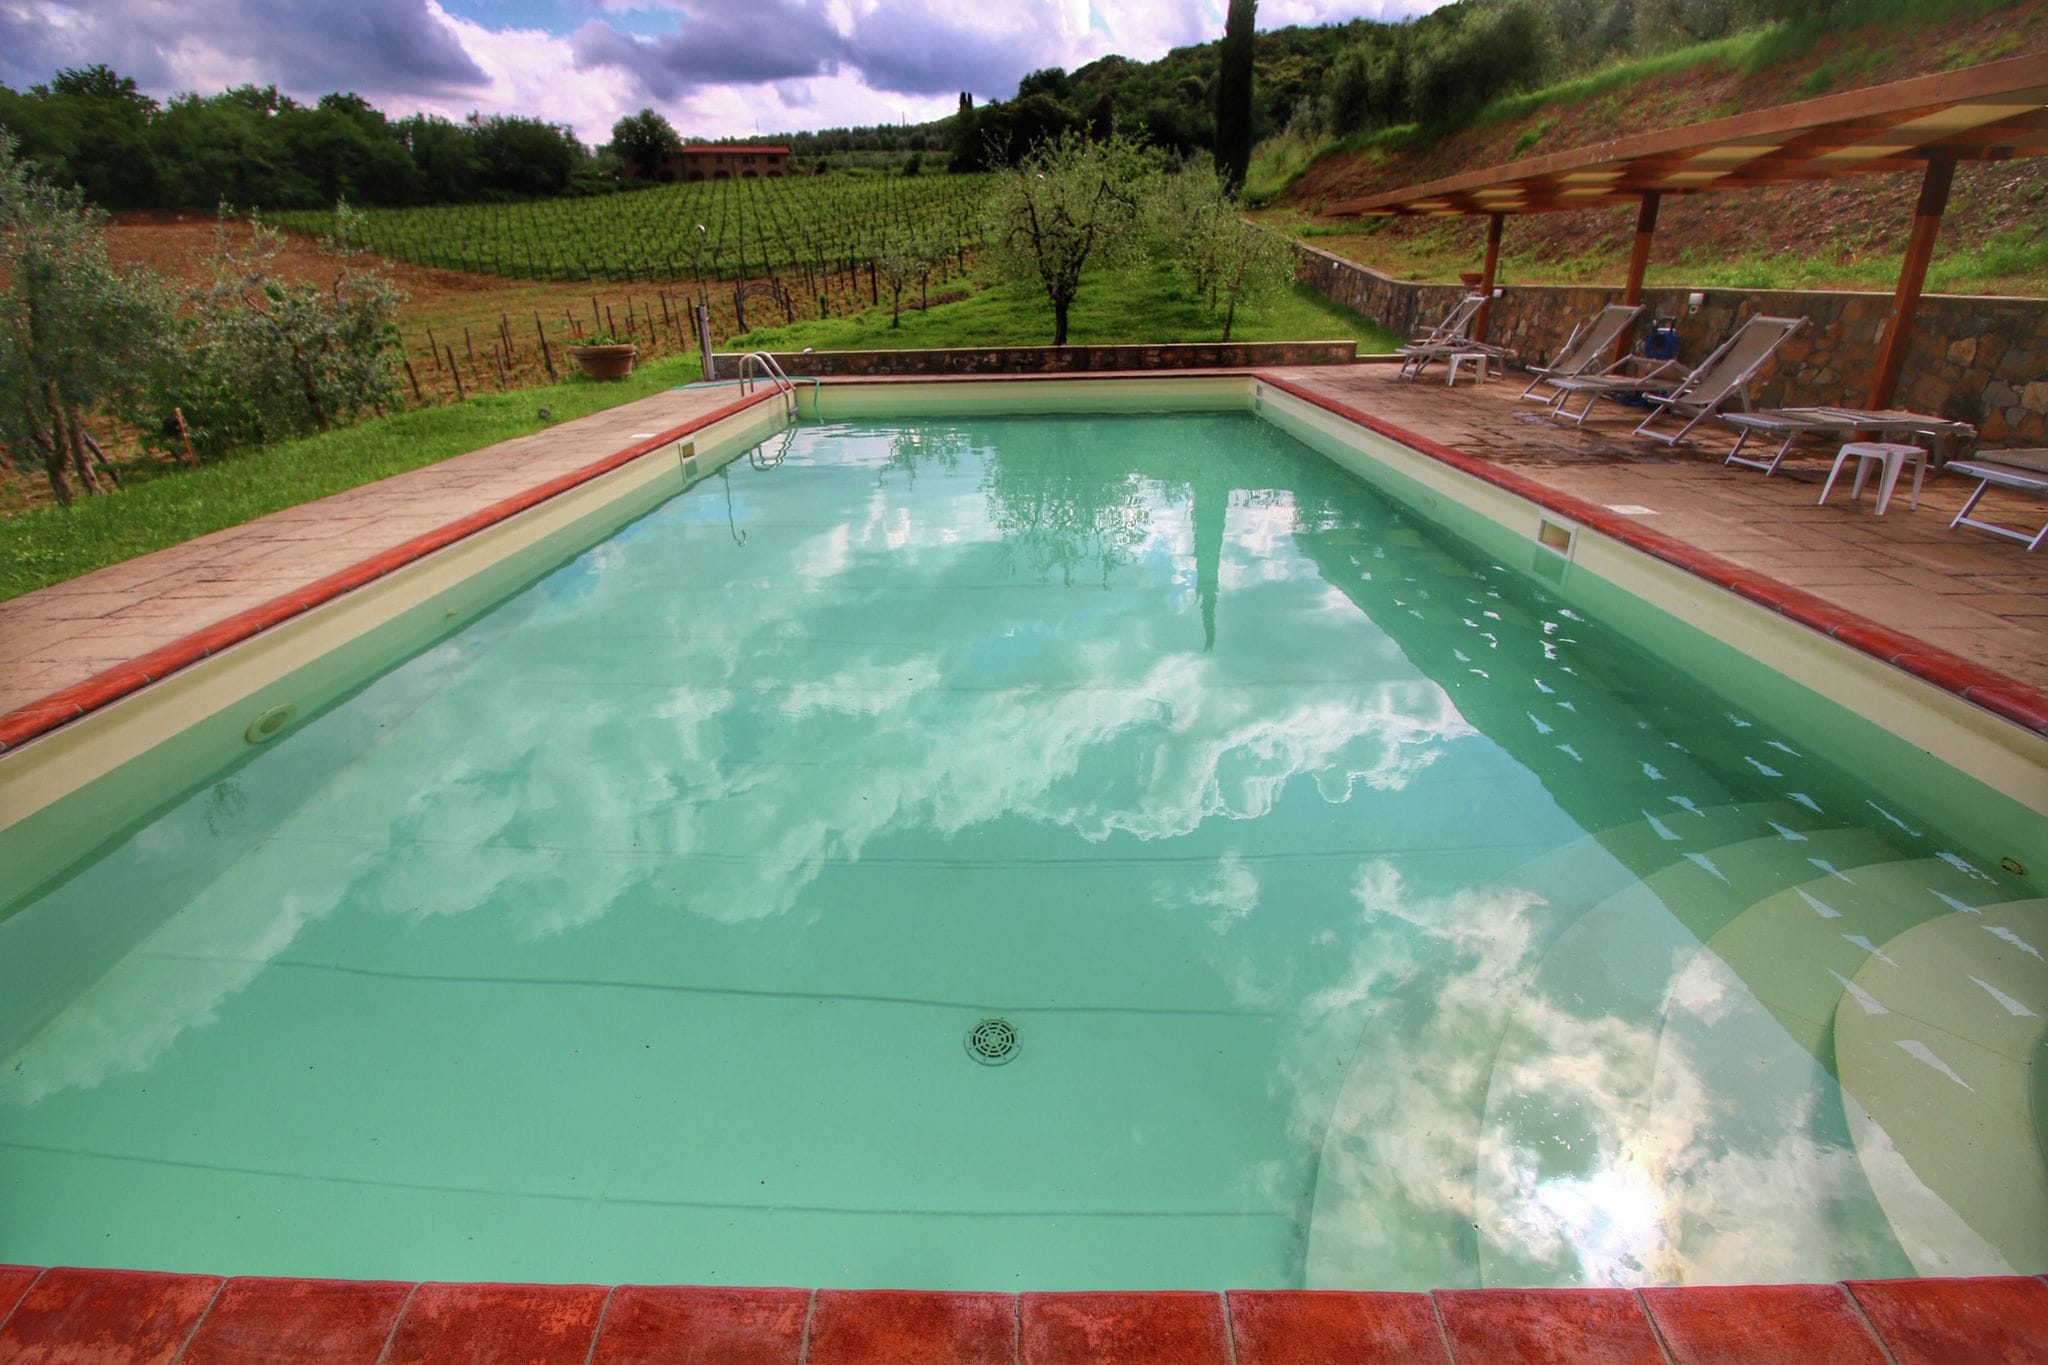 Home with swimming pool in a cental location in Tuscany